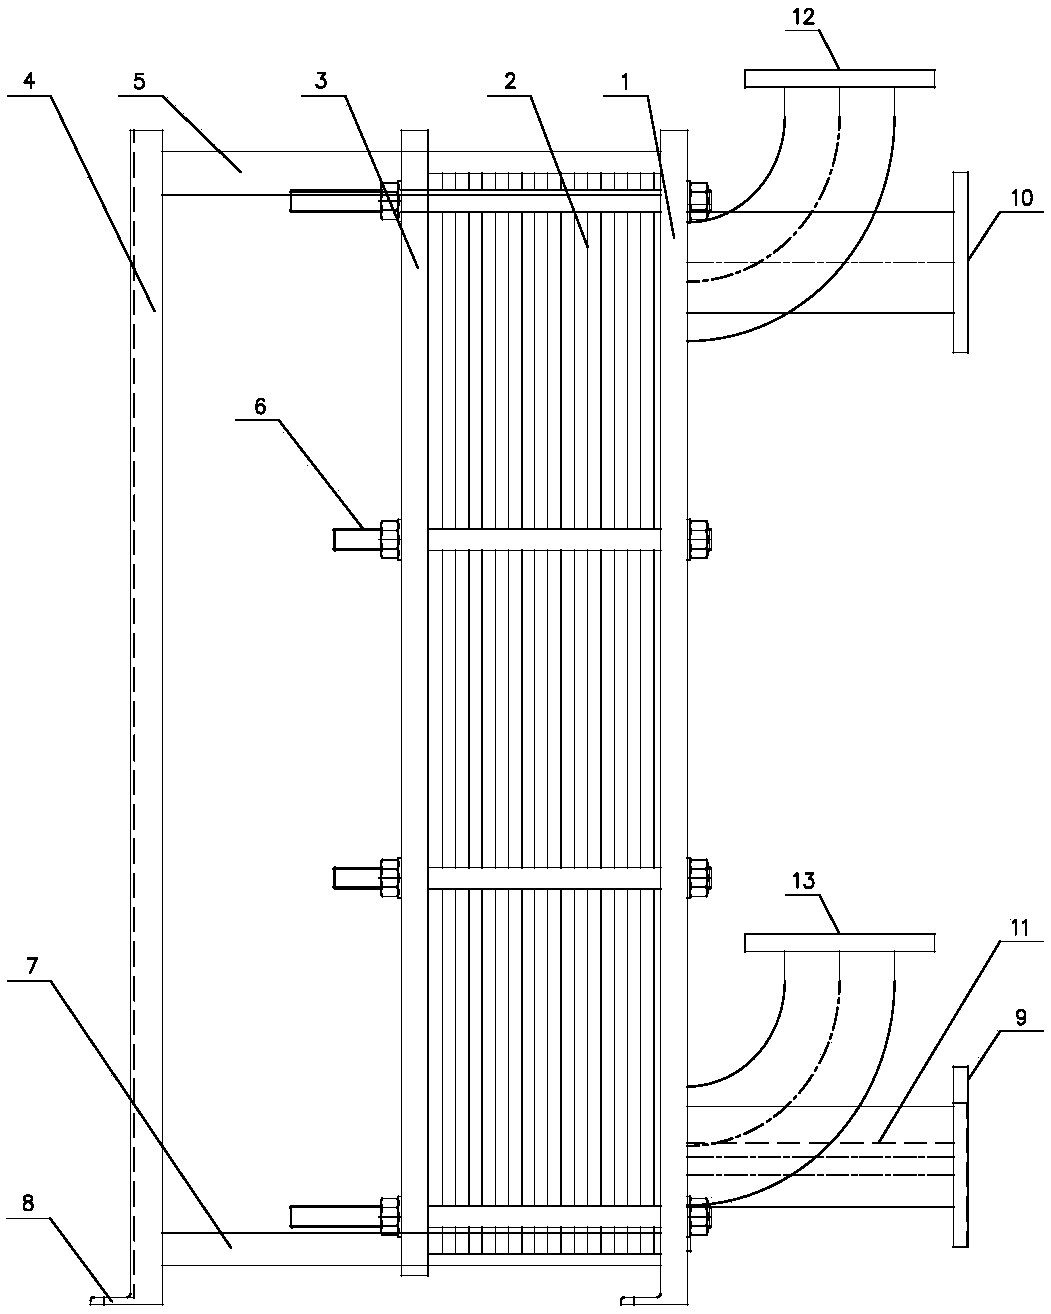 A high-efficiency phase-change plate evaporator